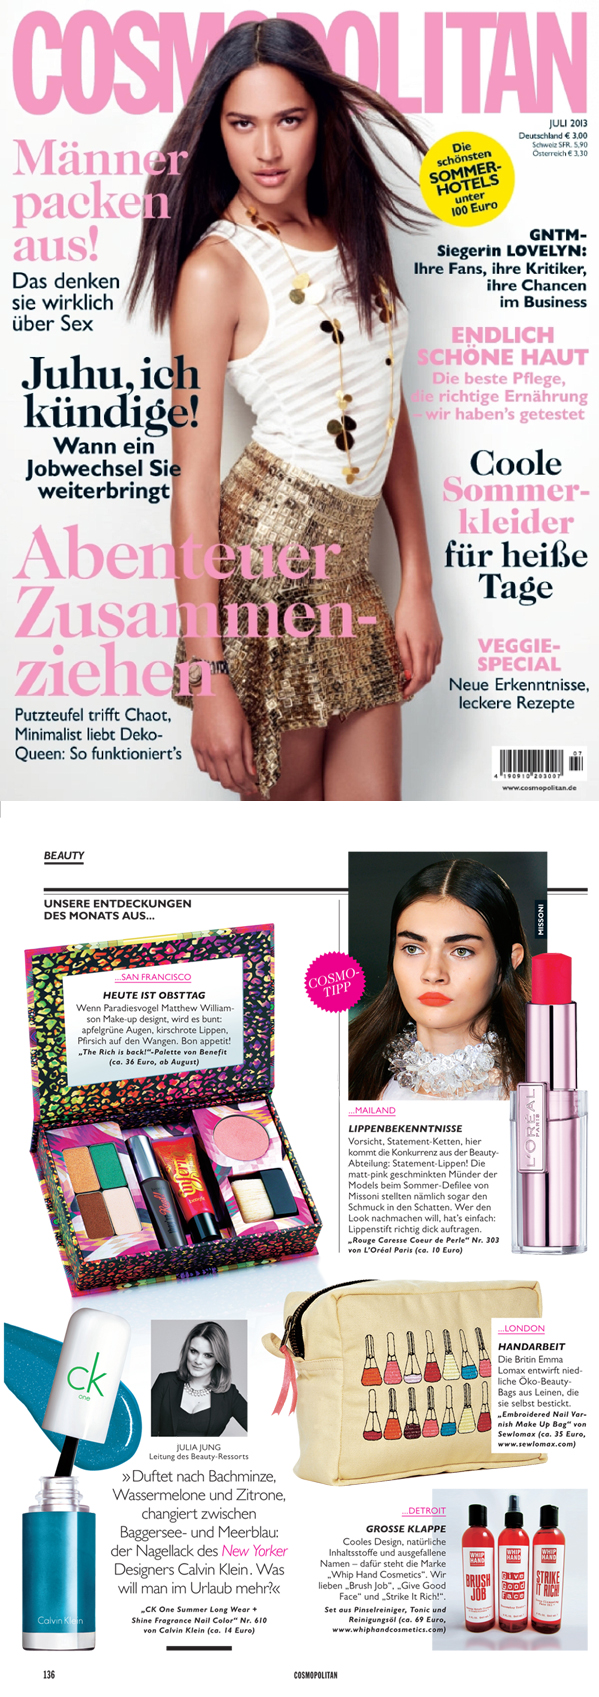 Whip Hand Cosmetics Triple Pro Pack Skincare Featured in July Edition of Cosmo Germany